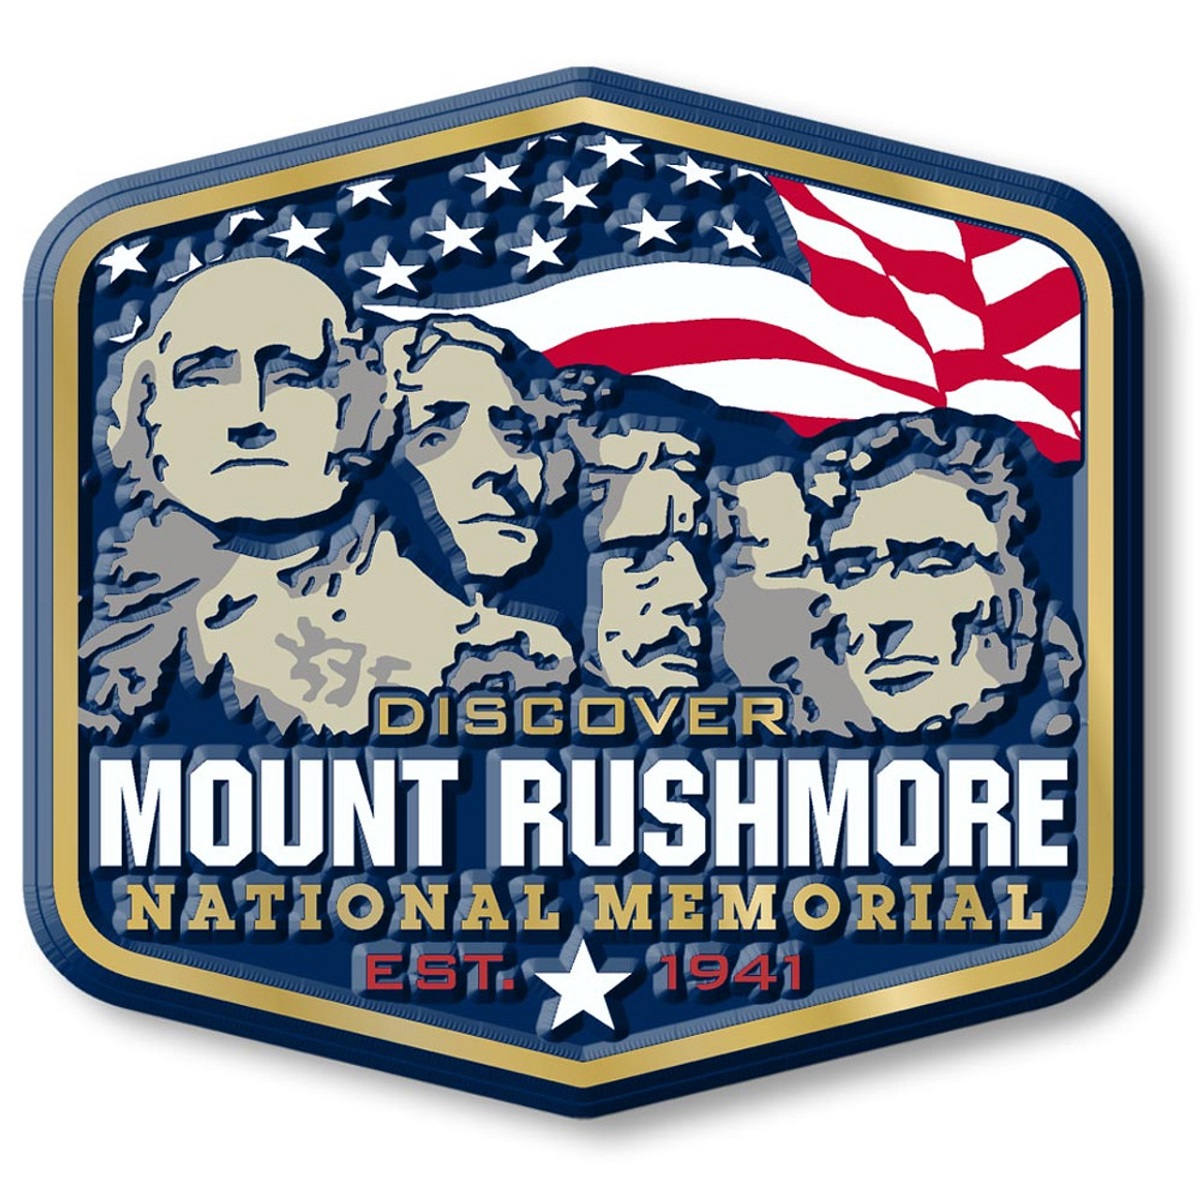 Various collectible memorabilia has been created for Mount Rushmore